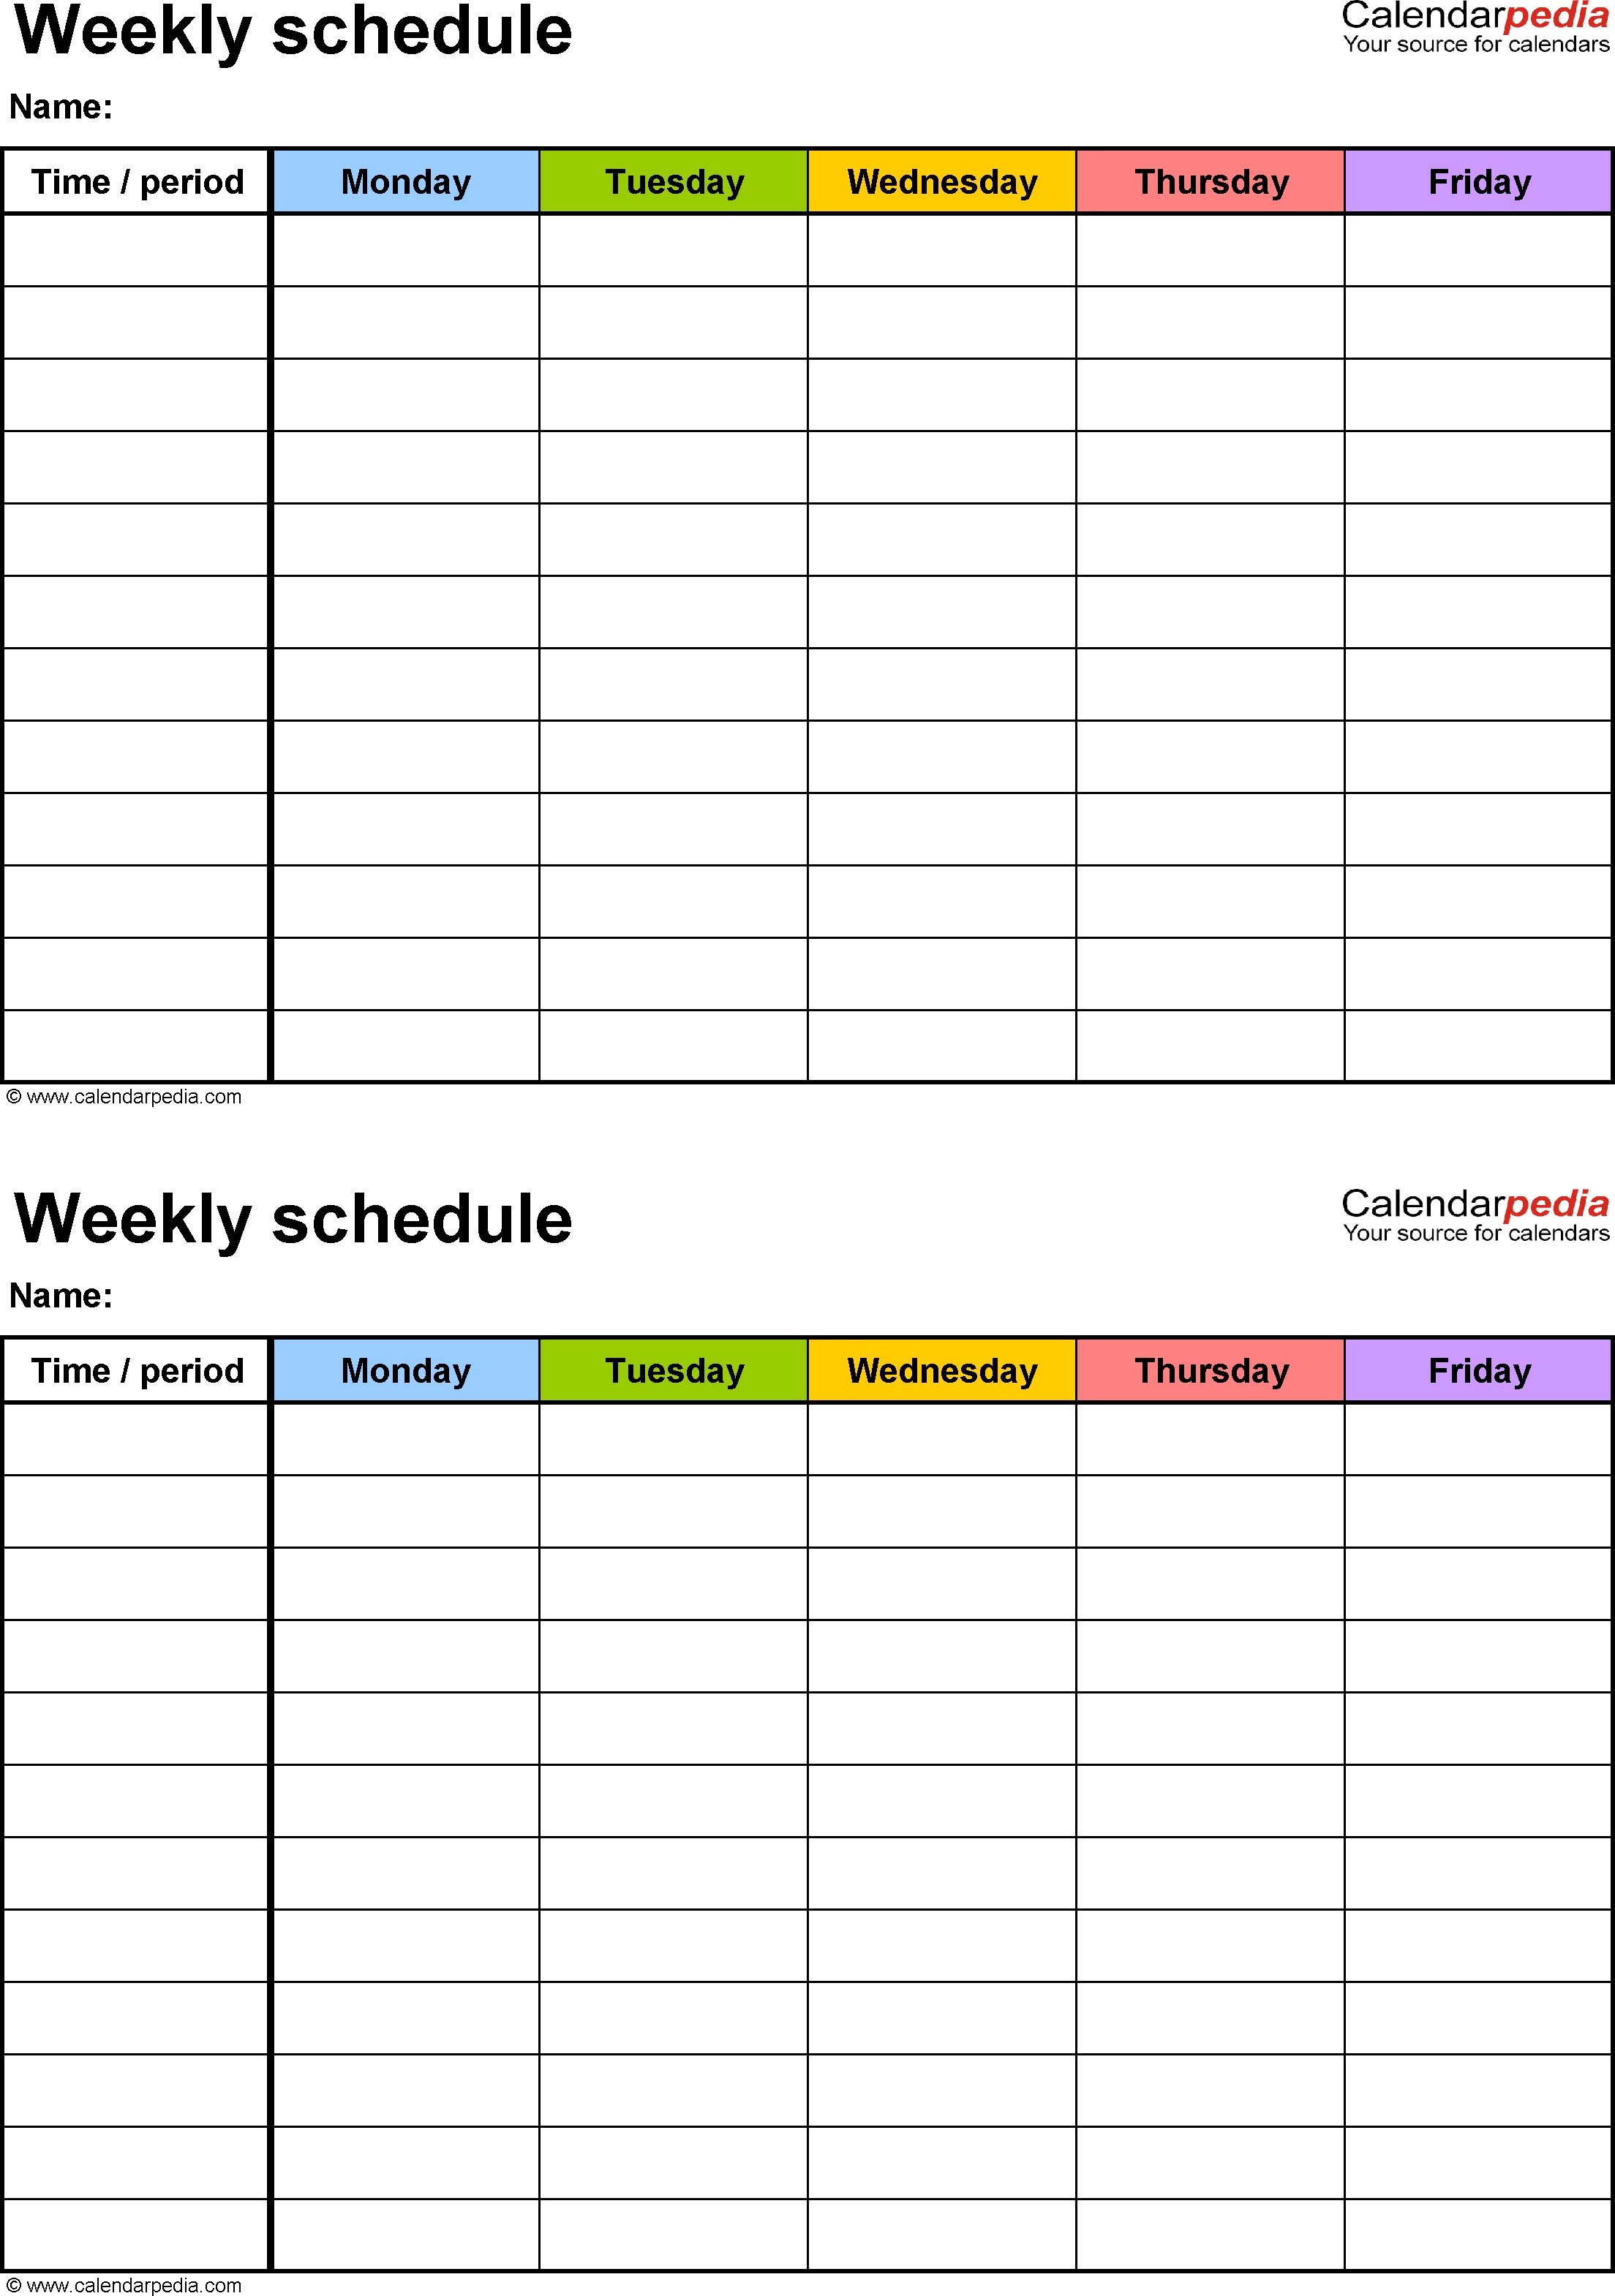 Free Weekly Schedule Templates For Word - 18 Templates-Blank Calender Two Weeks